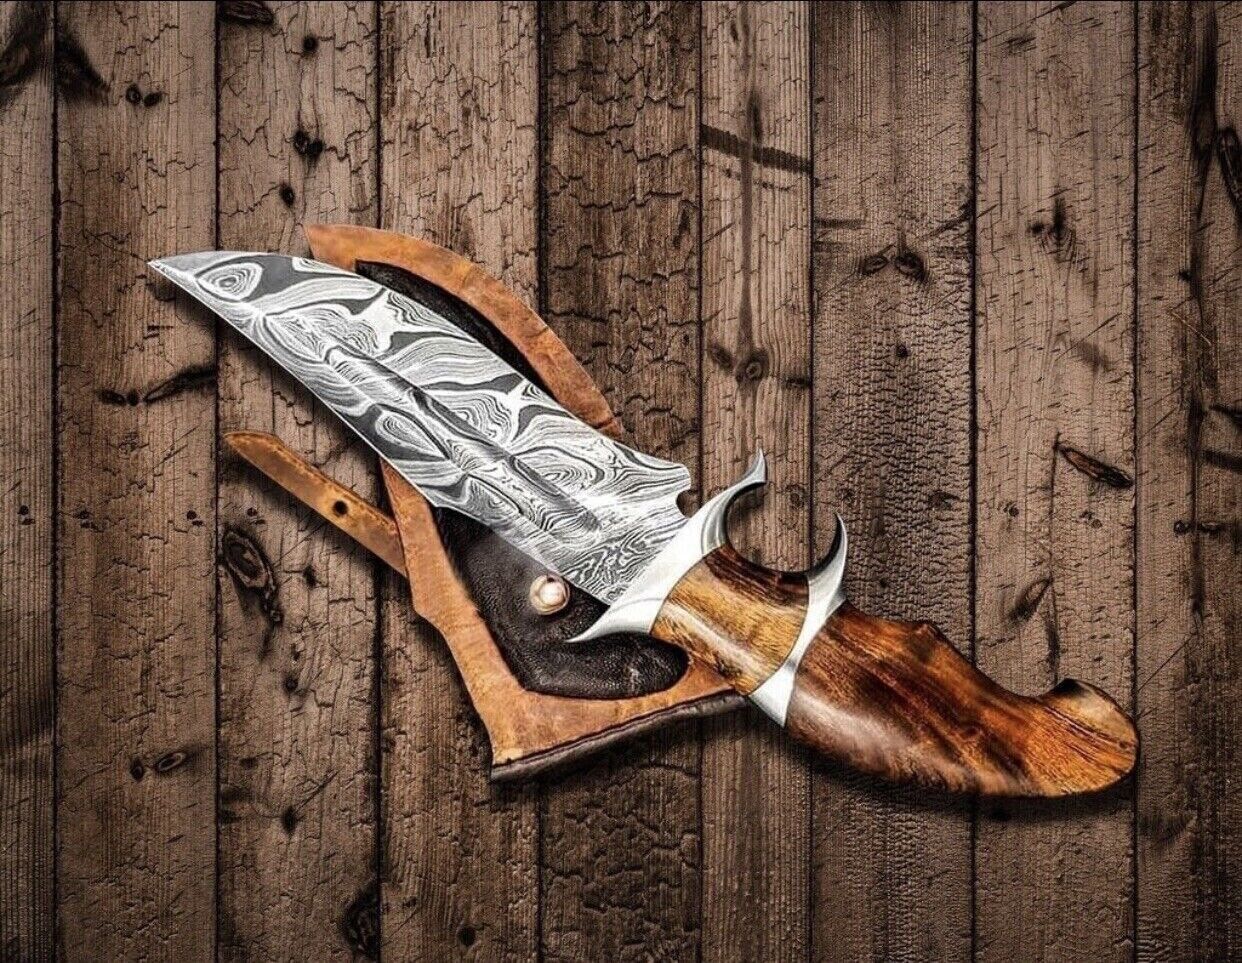 WILD BEAUTIFUL HANDMADE 13 INCHES LONG IN DAMASCUS STEEL HUNTING BOWIE KNIFE